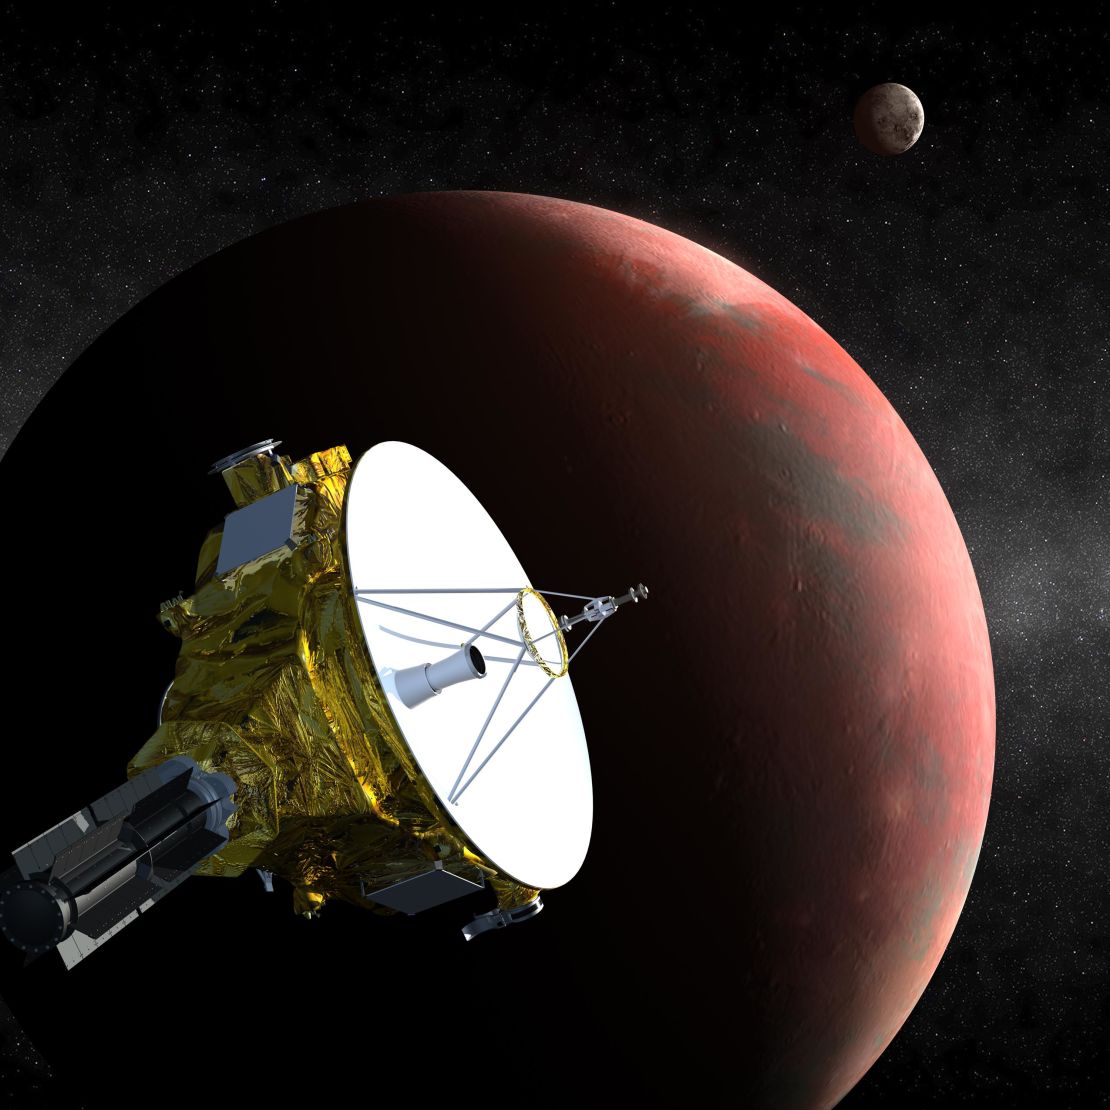 NASA's New Horizons spacecraft is the first probe sent to Pluto and it'scheduled to arrive in July 2015. This is an artist's concept of the spacecraft flying past Pluto. 